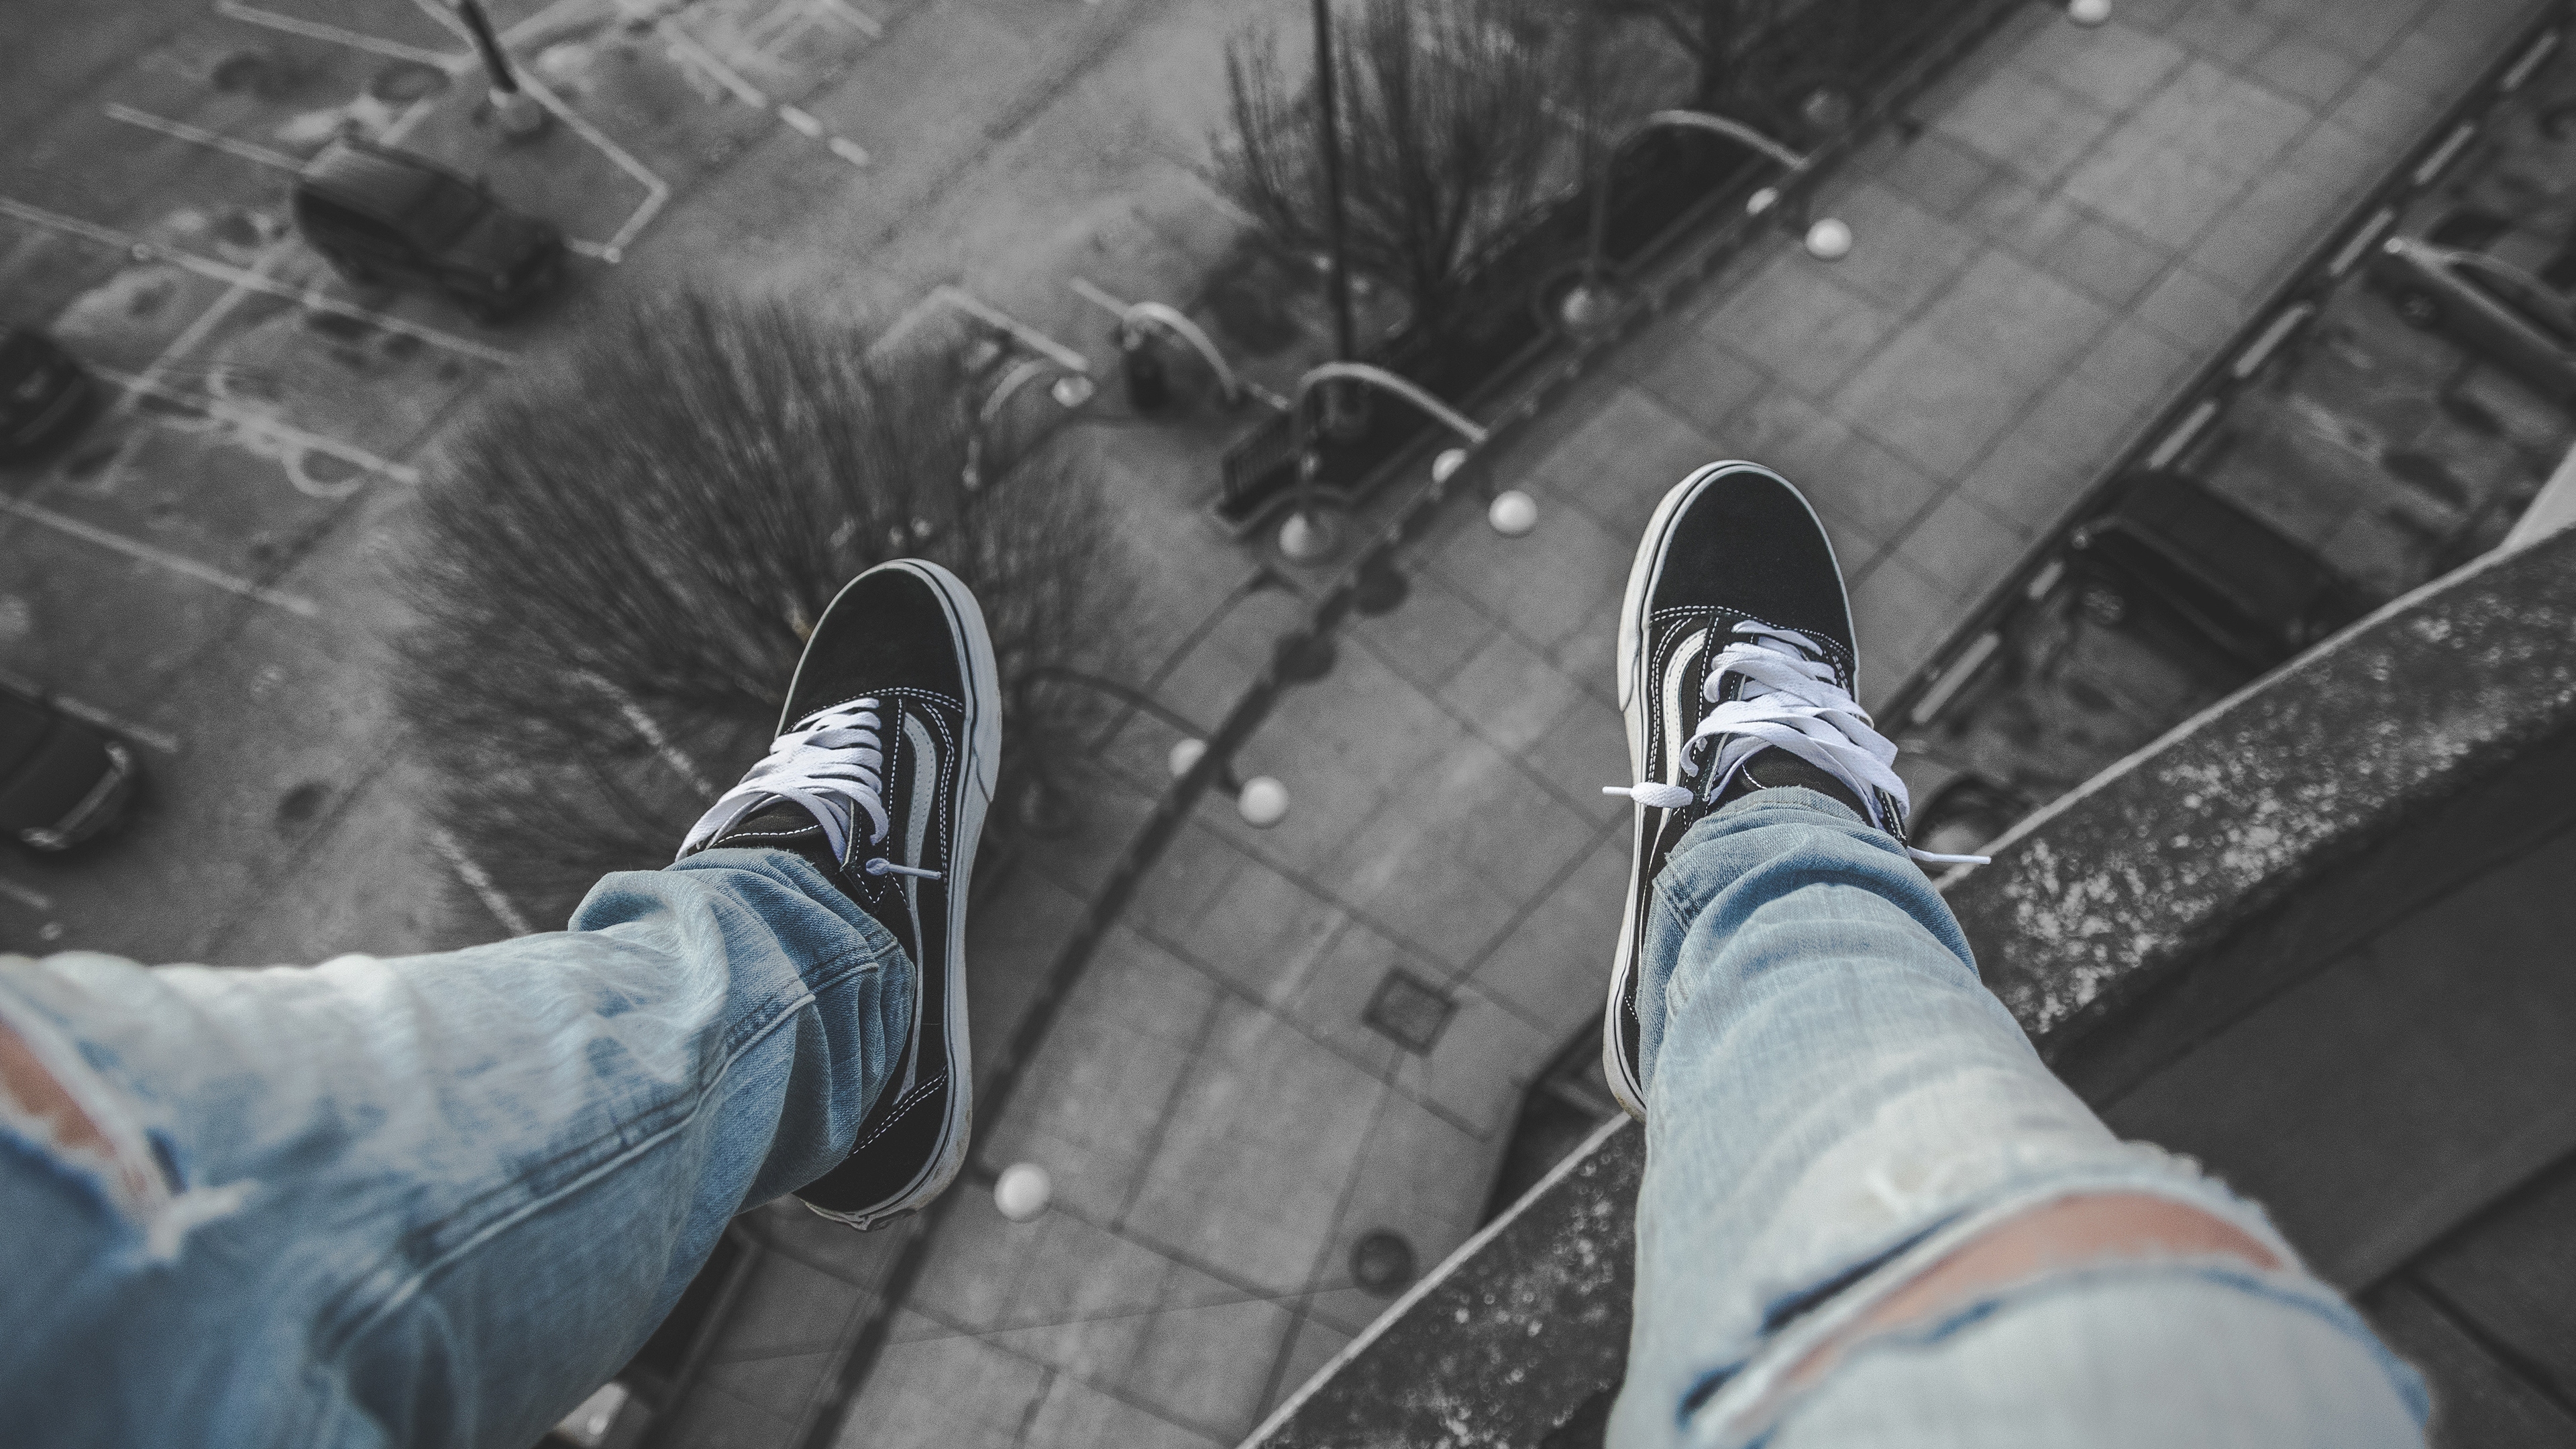 Birds Eye View Rooftopping Vans Company Shoes Jeans Edit Avery Richardson 3840x2160